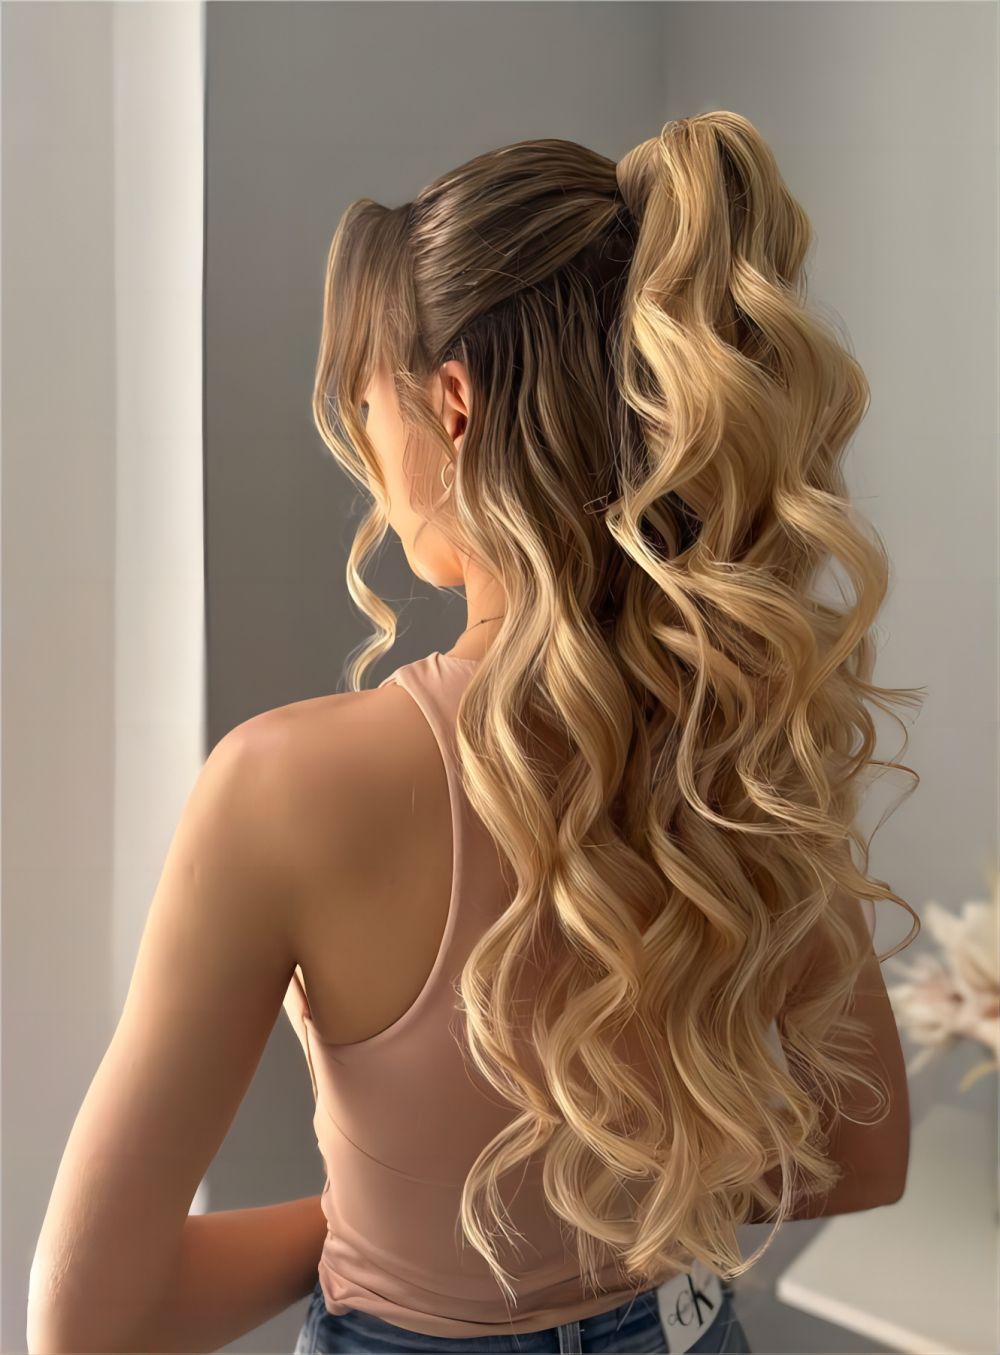 The Best Prom Hairstyles 2019 | Makeup.com